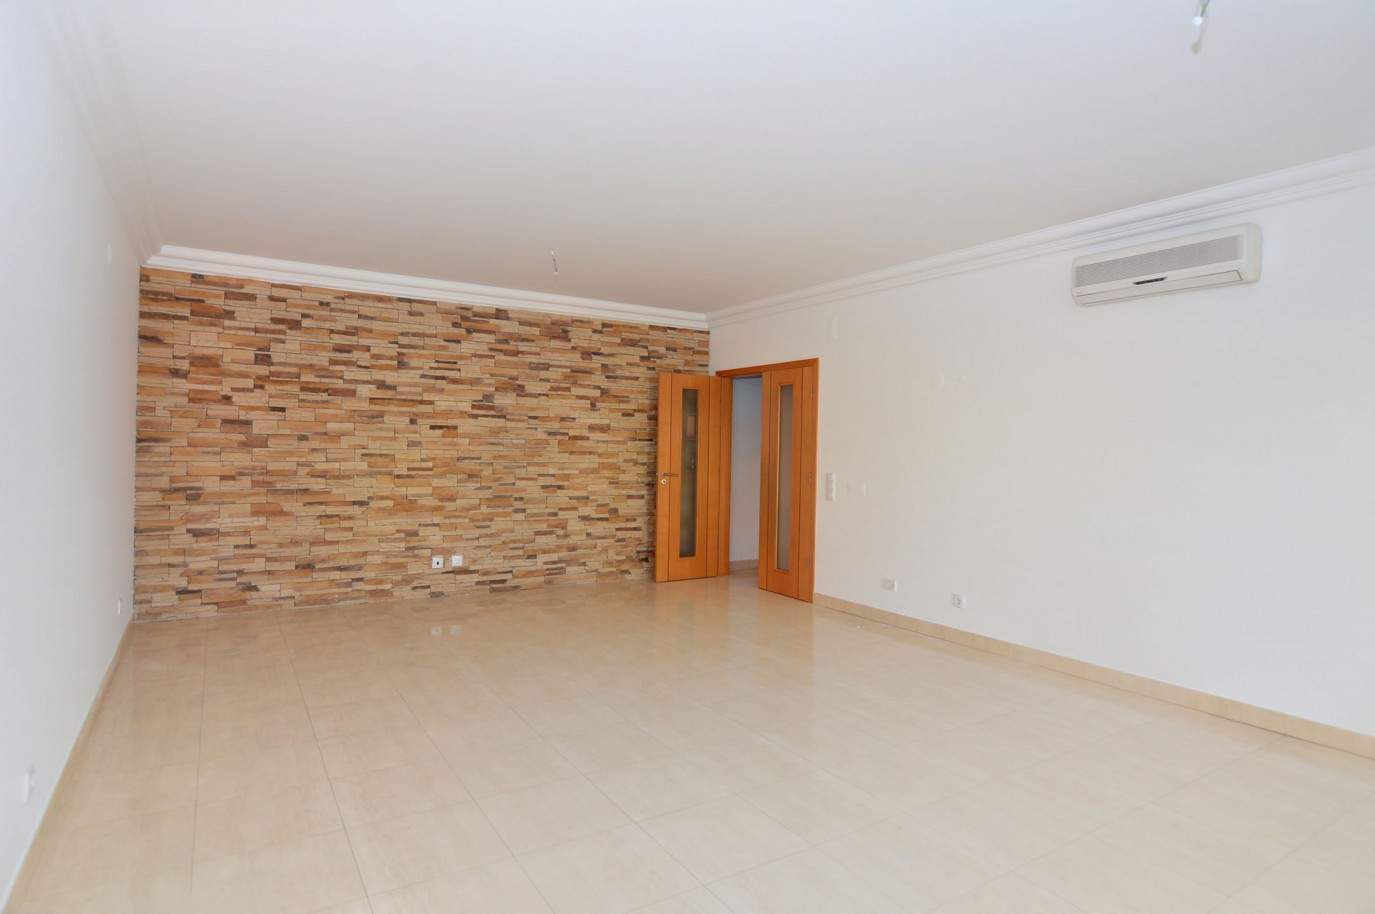 3 bedroom apartment with pool, for sale in Lagos, Algarve_212539